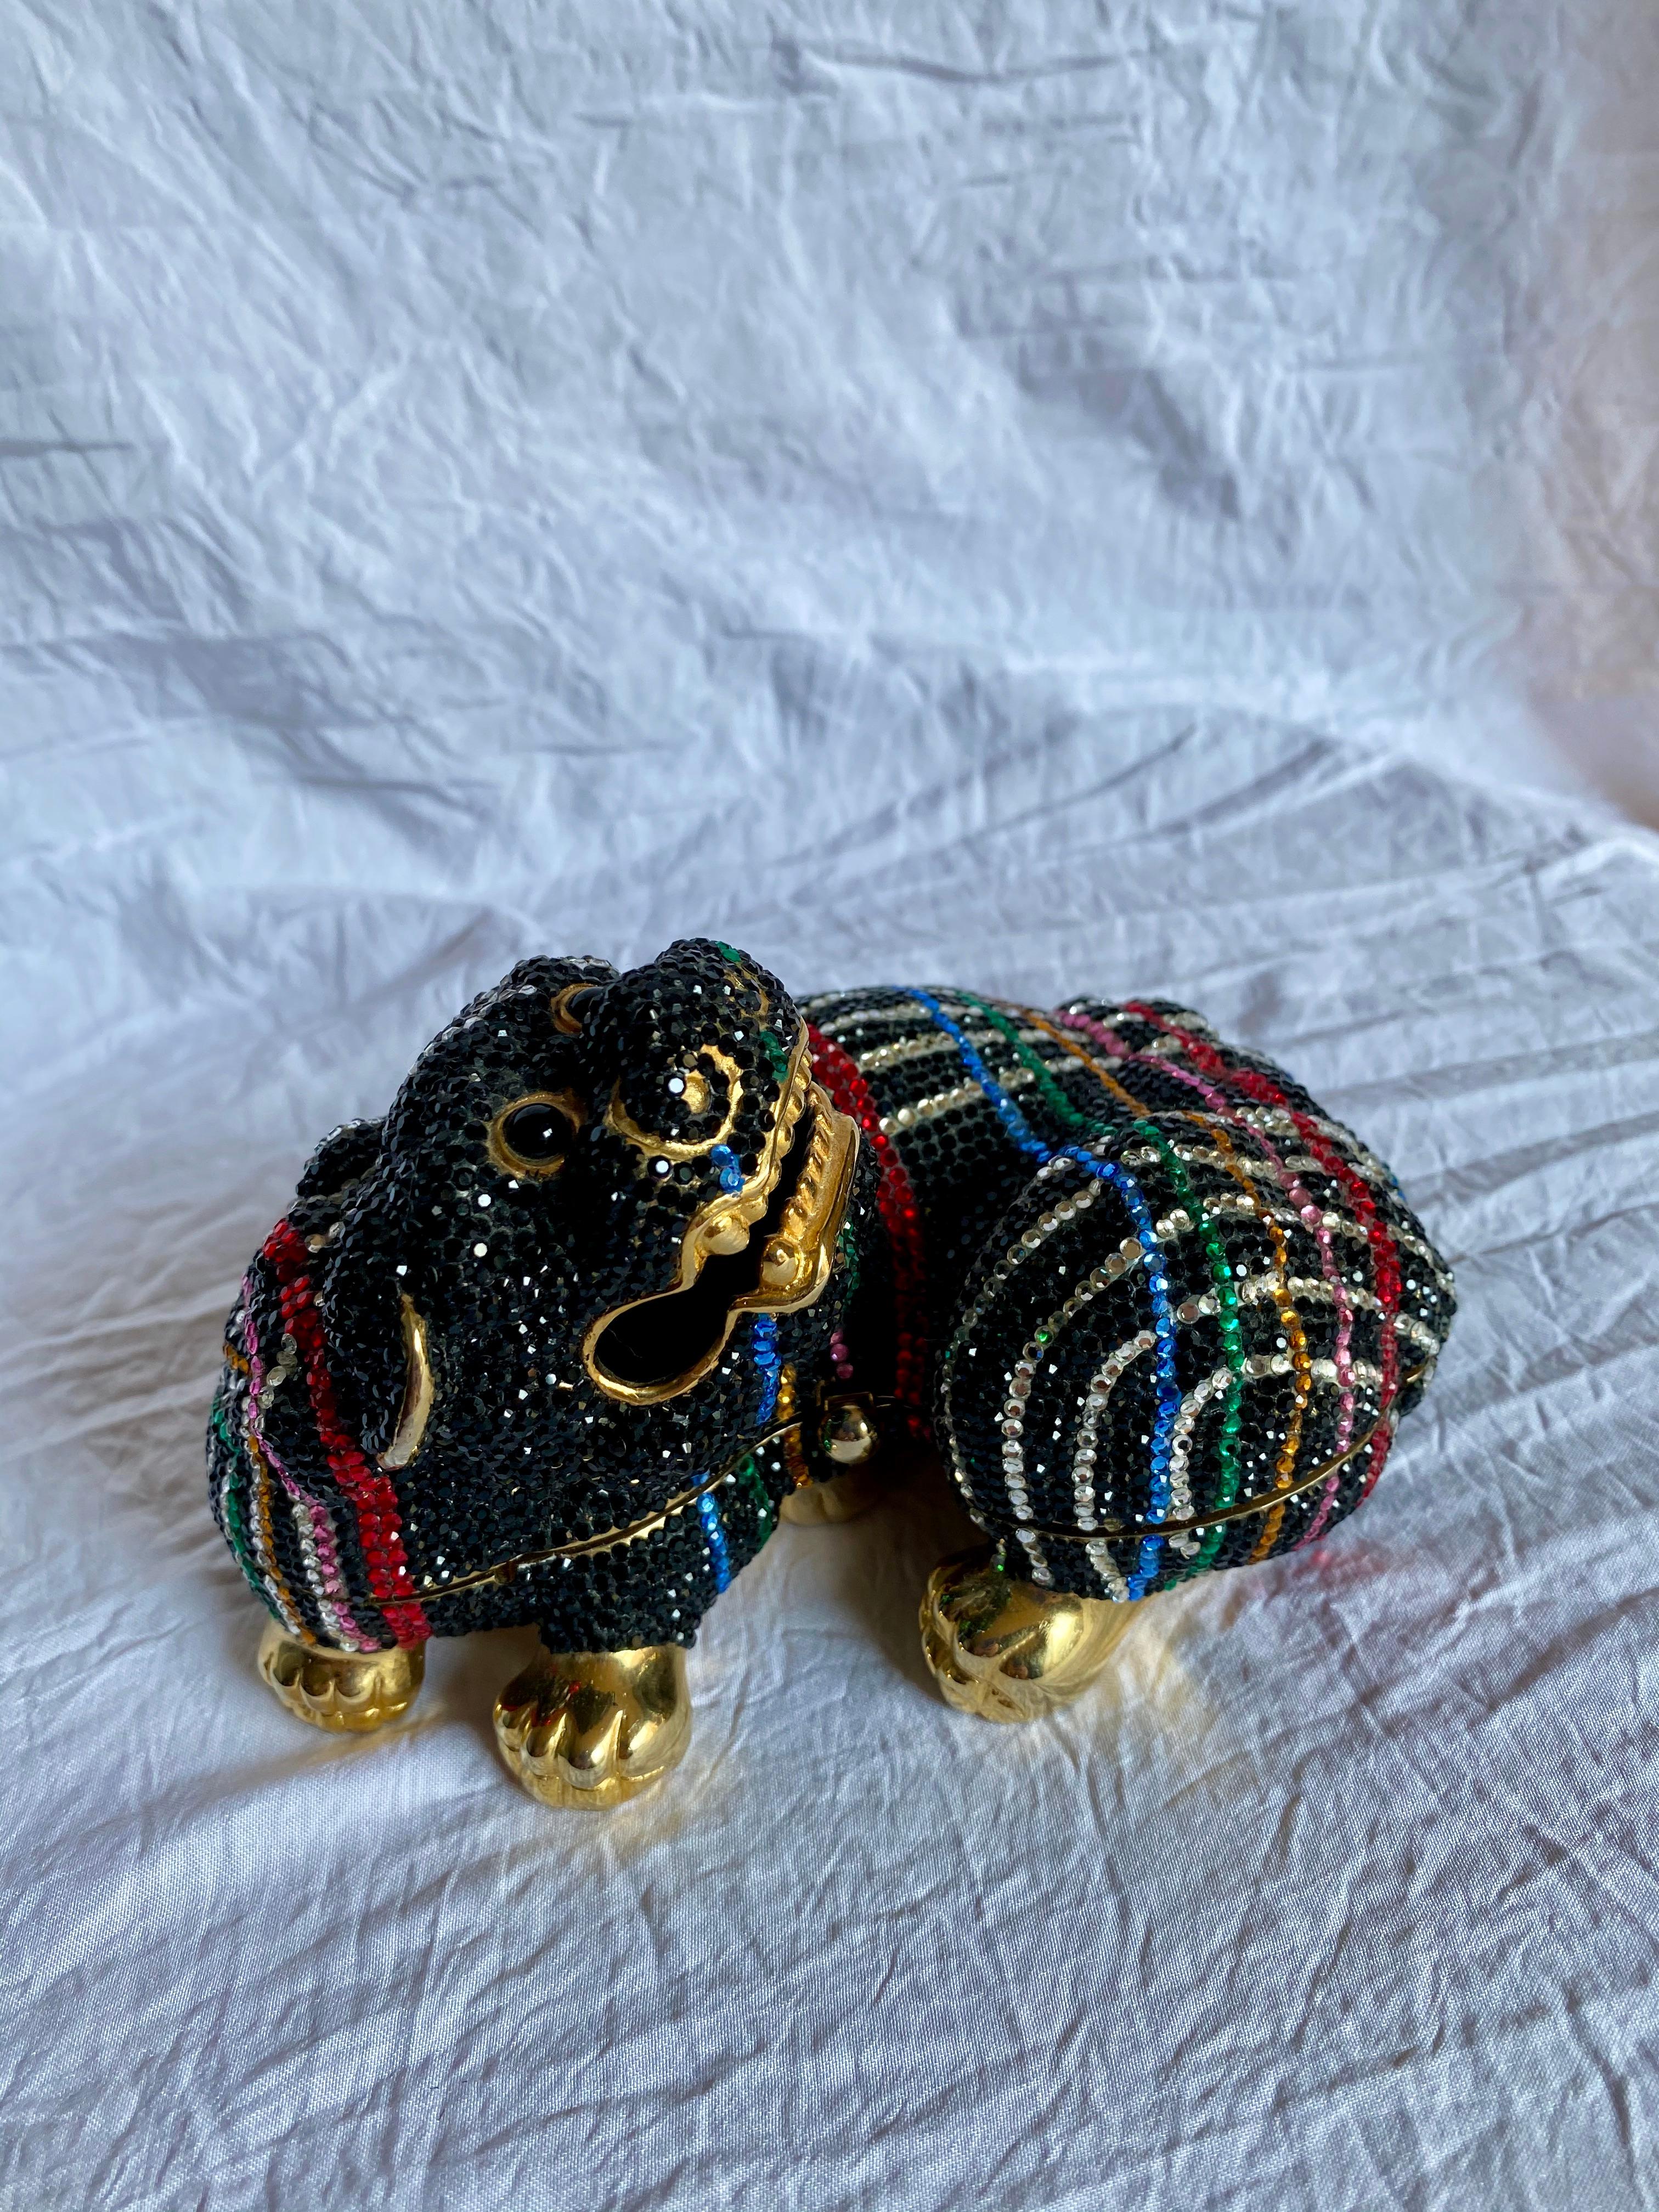 Leiber’s classic Foo Dog minaudiere made with gold-tone hardware covered in striking black swarovski crystals and silver, blue, green, yellow, pink and red crystals set in a crosshatched design. This bag features a push lock clasp that currently